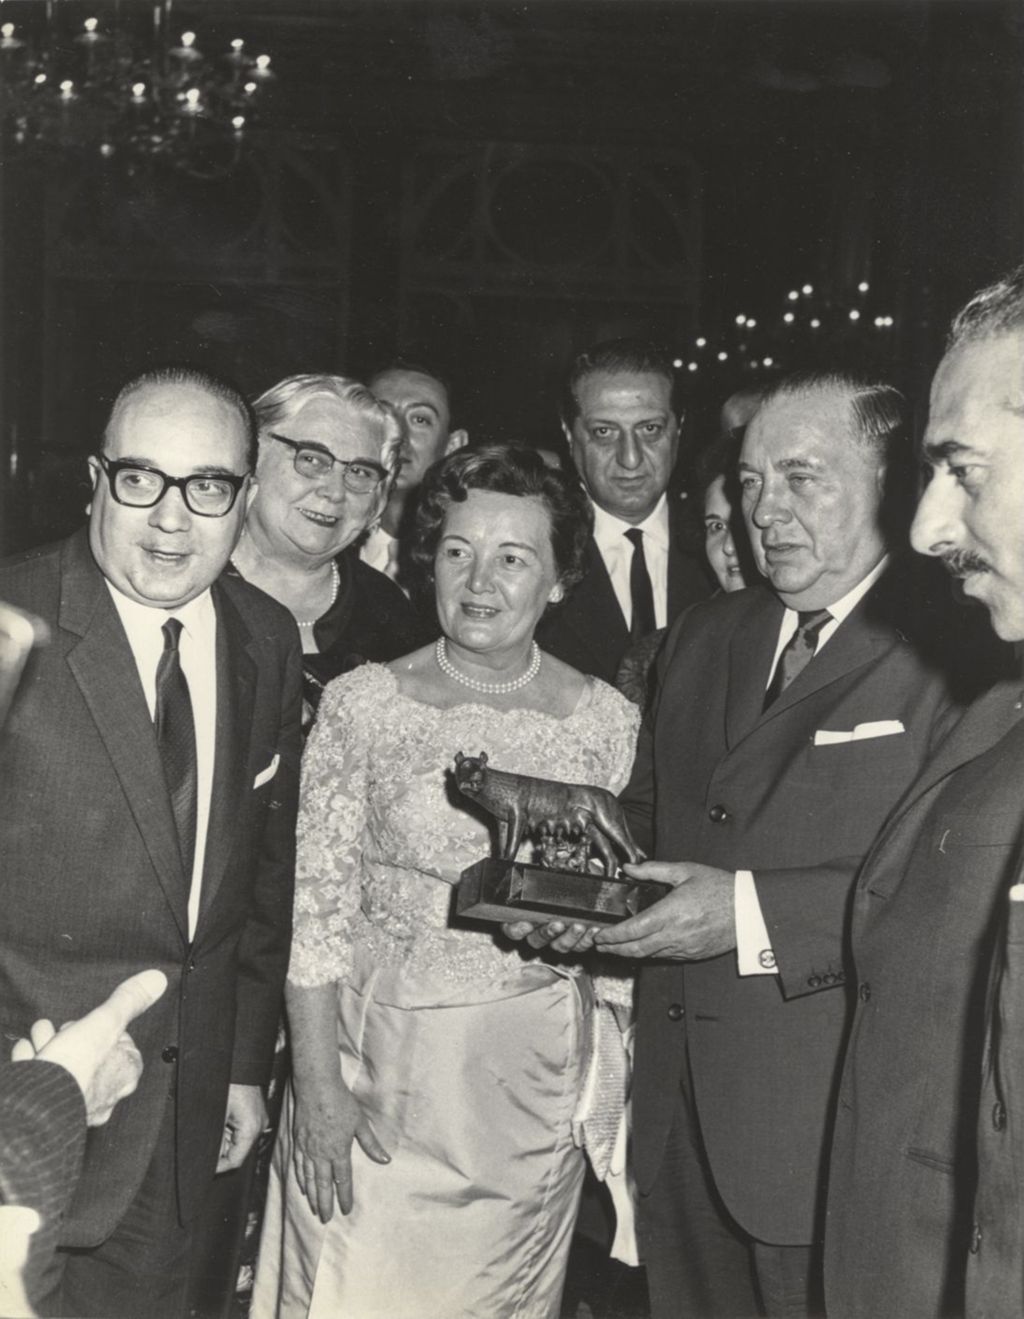 Miniature of Richard J. Daley and Eleanor Daley receive gift at a reception in Rome